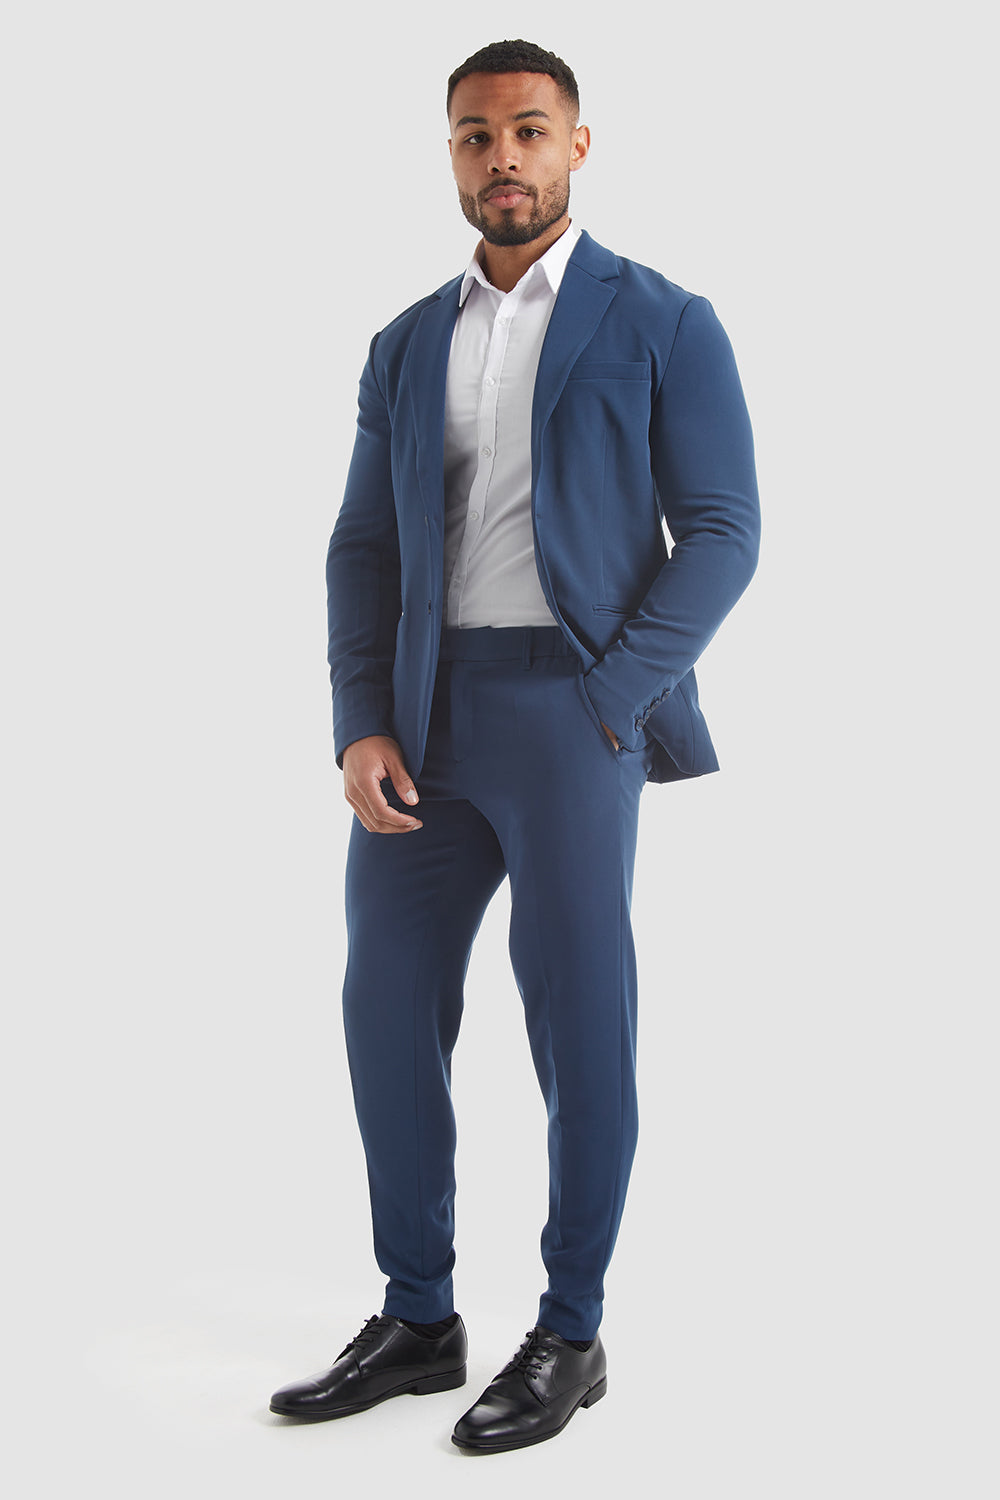 Mens Renoir All Colors Suit Pants Tapered Slacks Slim and Classic Fit -  Tuxedos Online